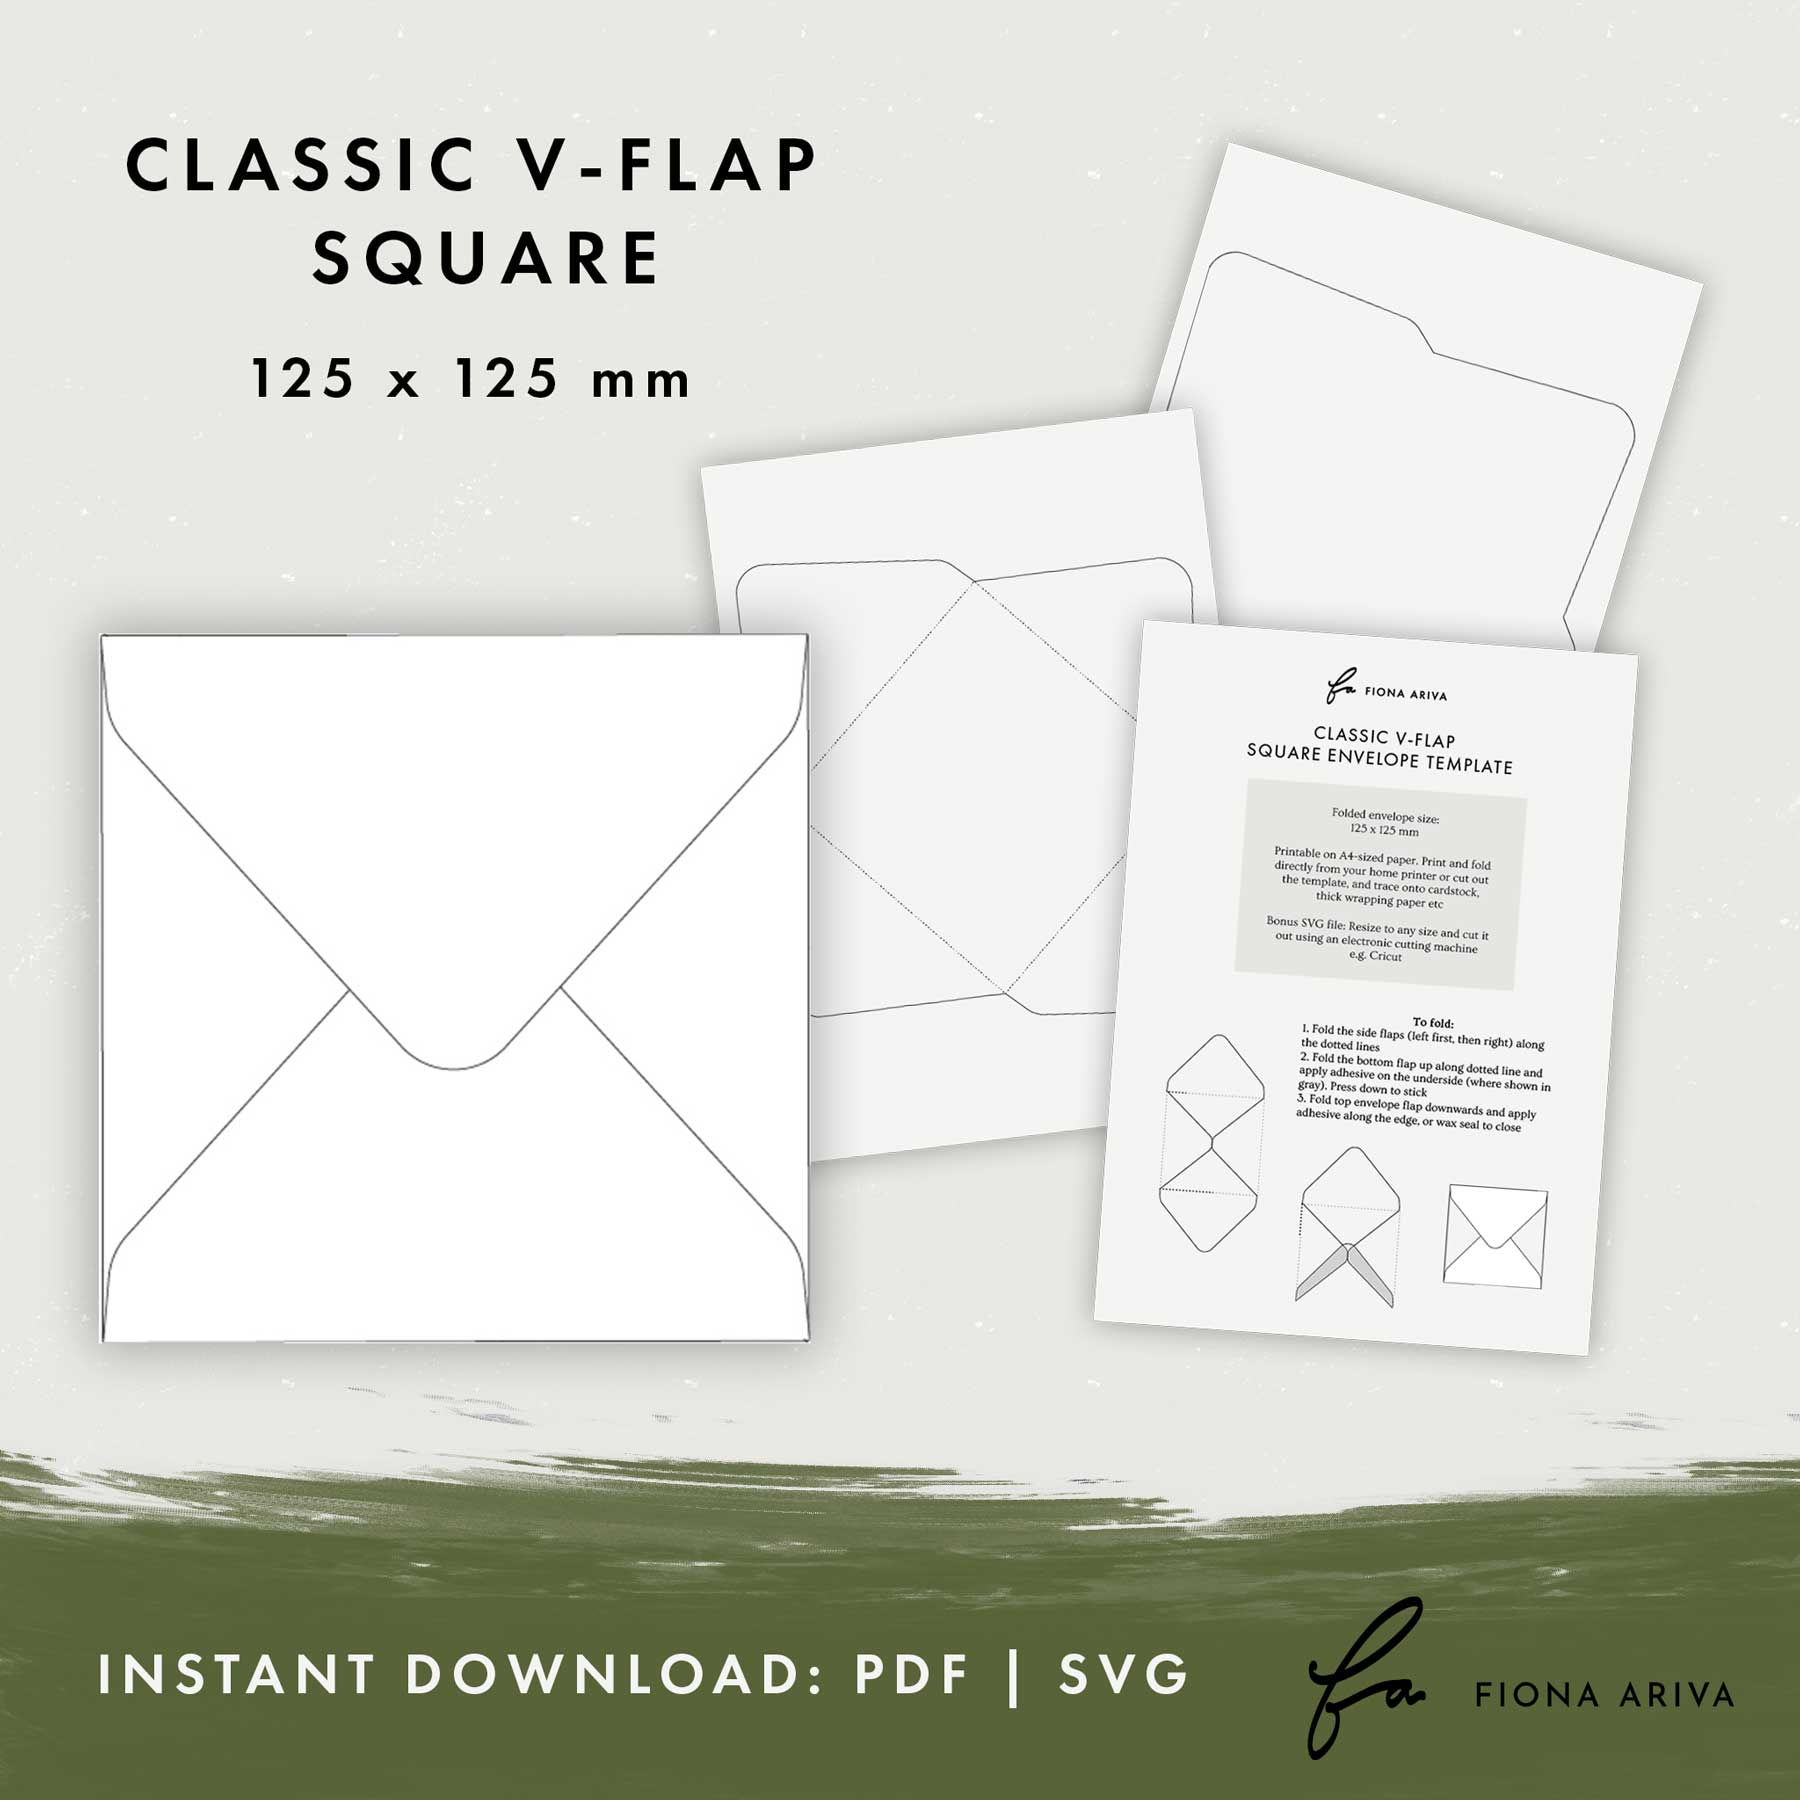 Classic VFlap Square Downloadable Envelope Template 125 x125mm Fiona